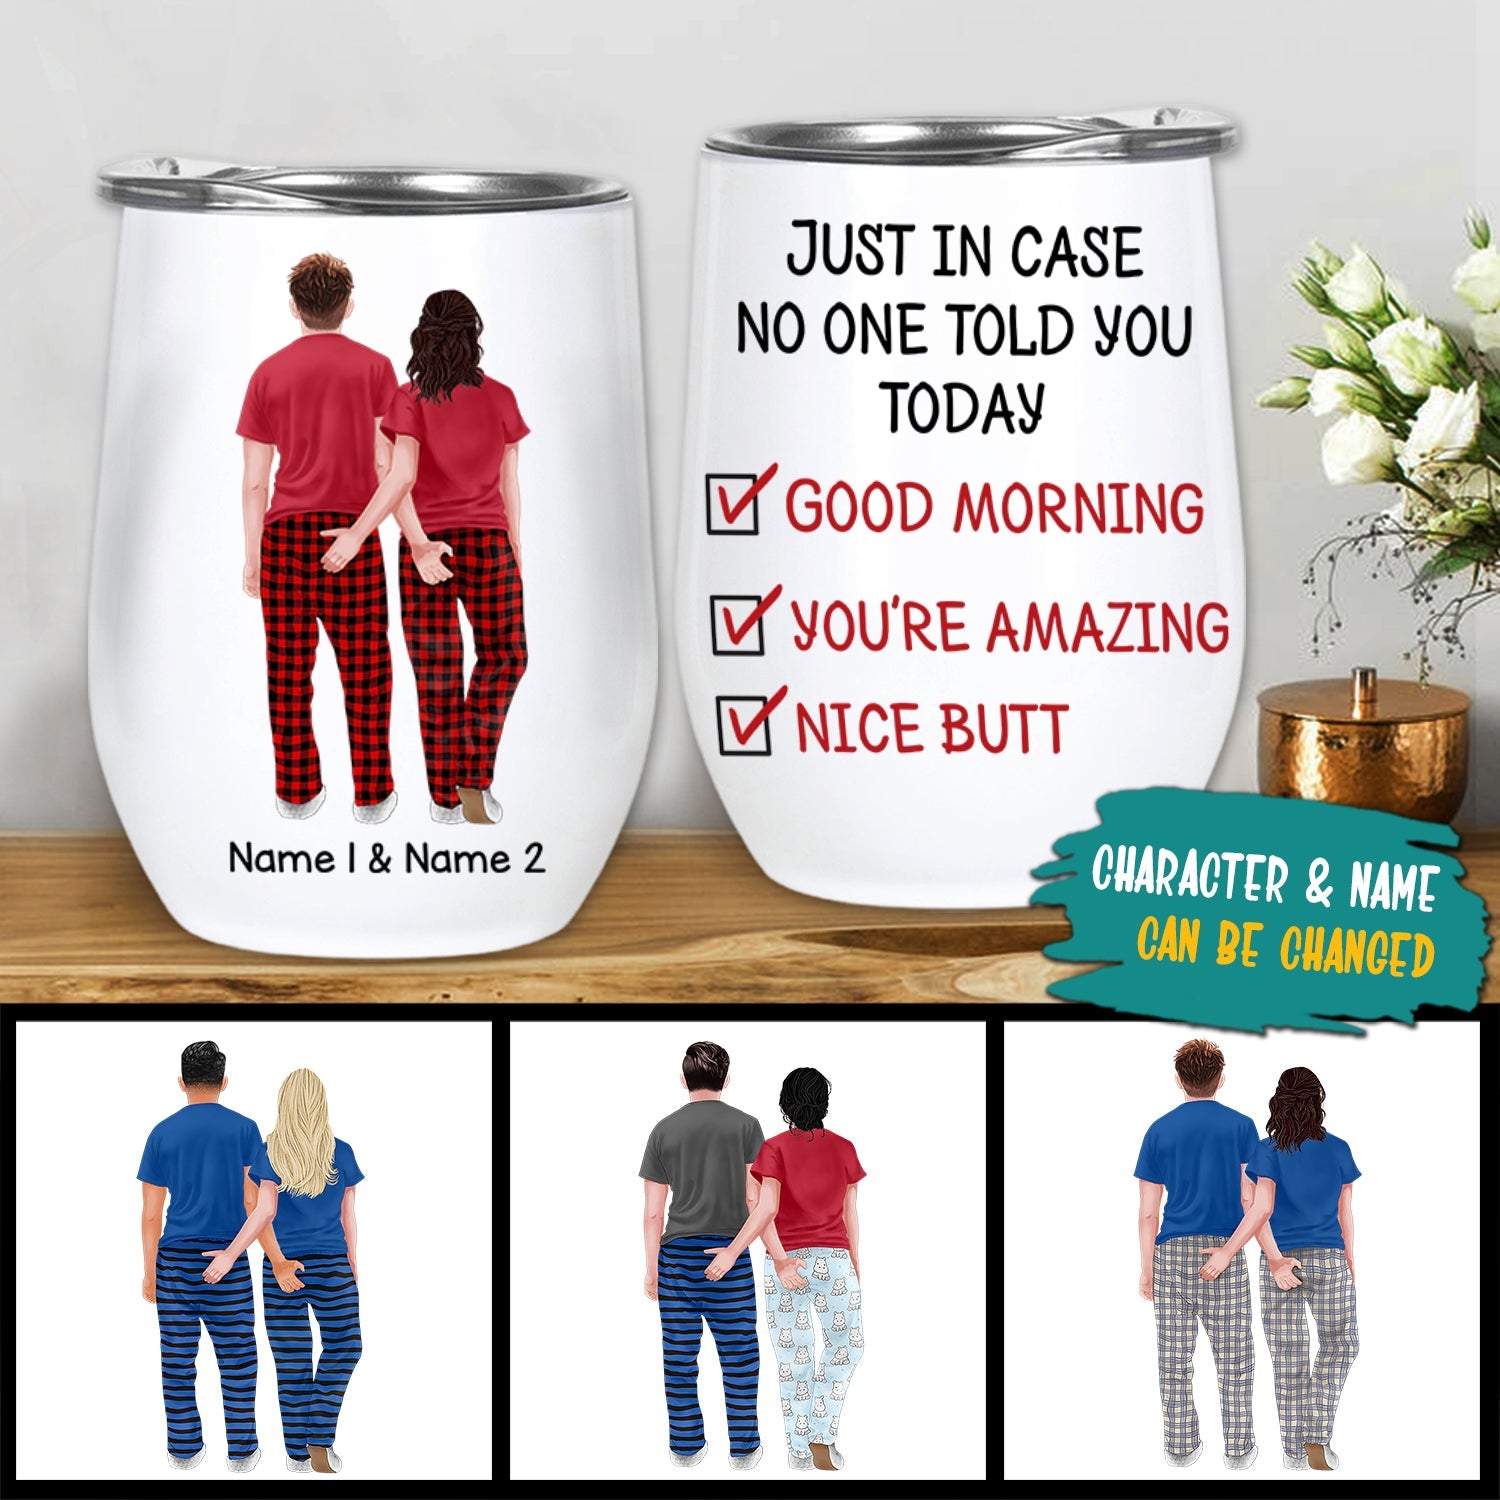 Just In Case No One Told You Today Good Morning You’re Amazing Nice Butt, Personalized Funny Wine Tumbler For Couples, Name And Character Can Be Changed